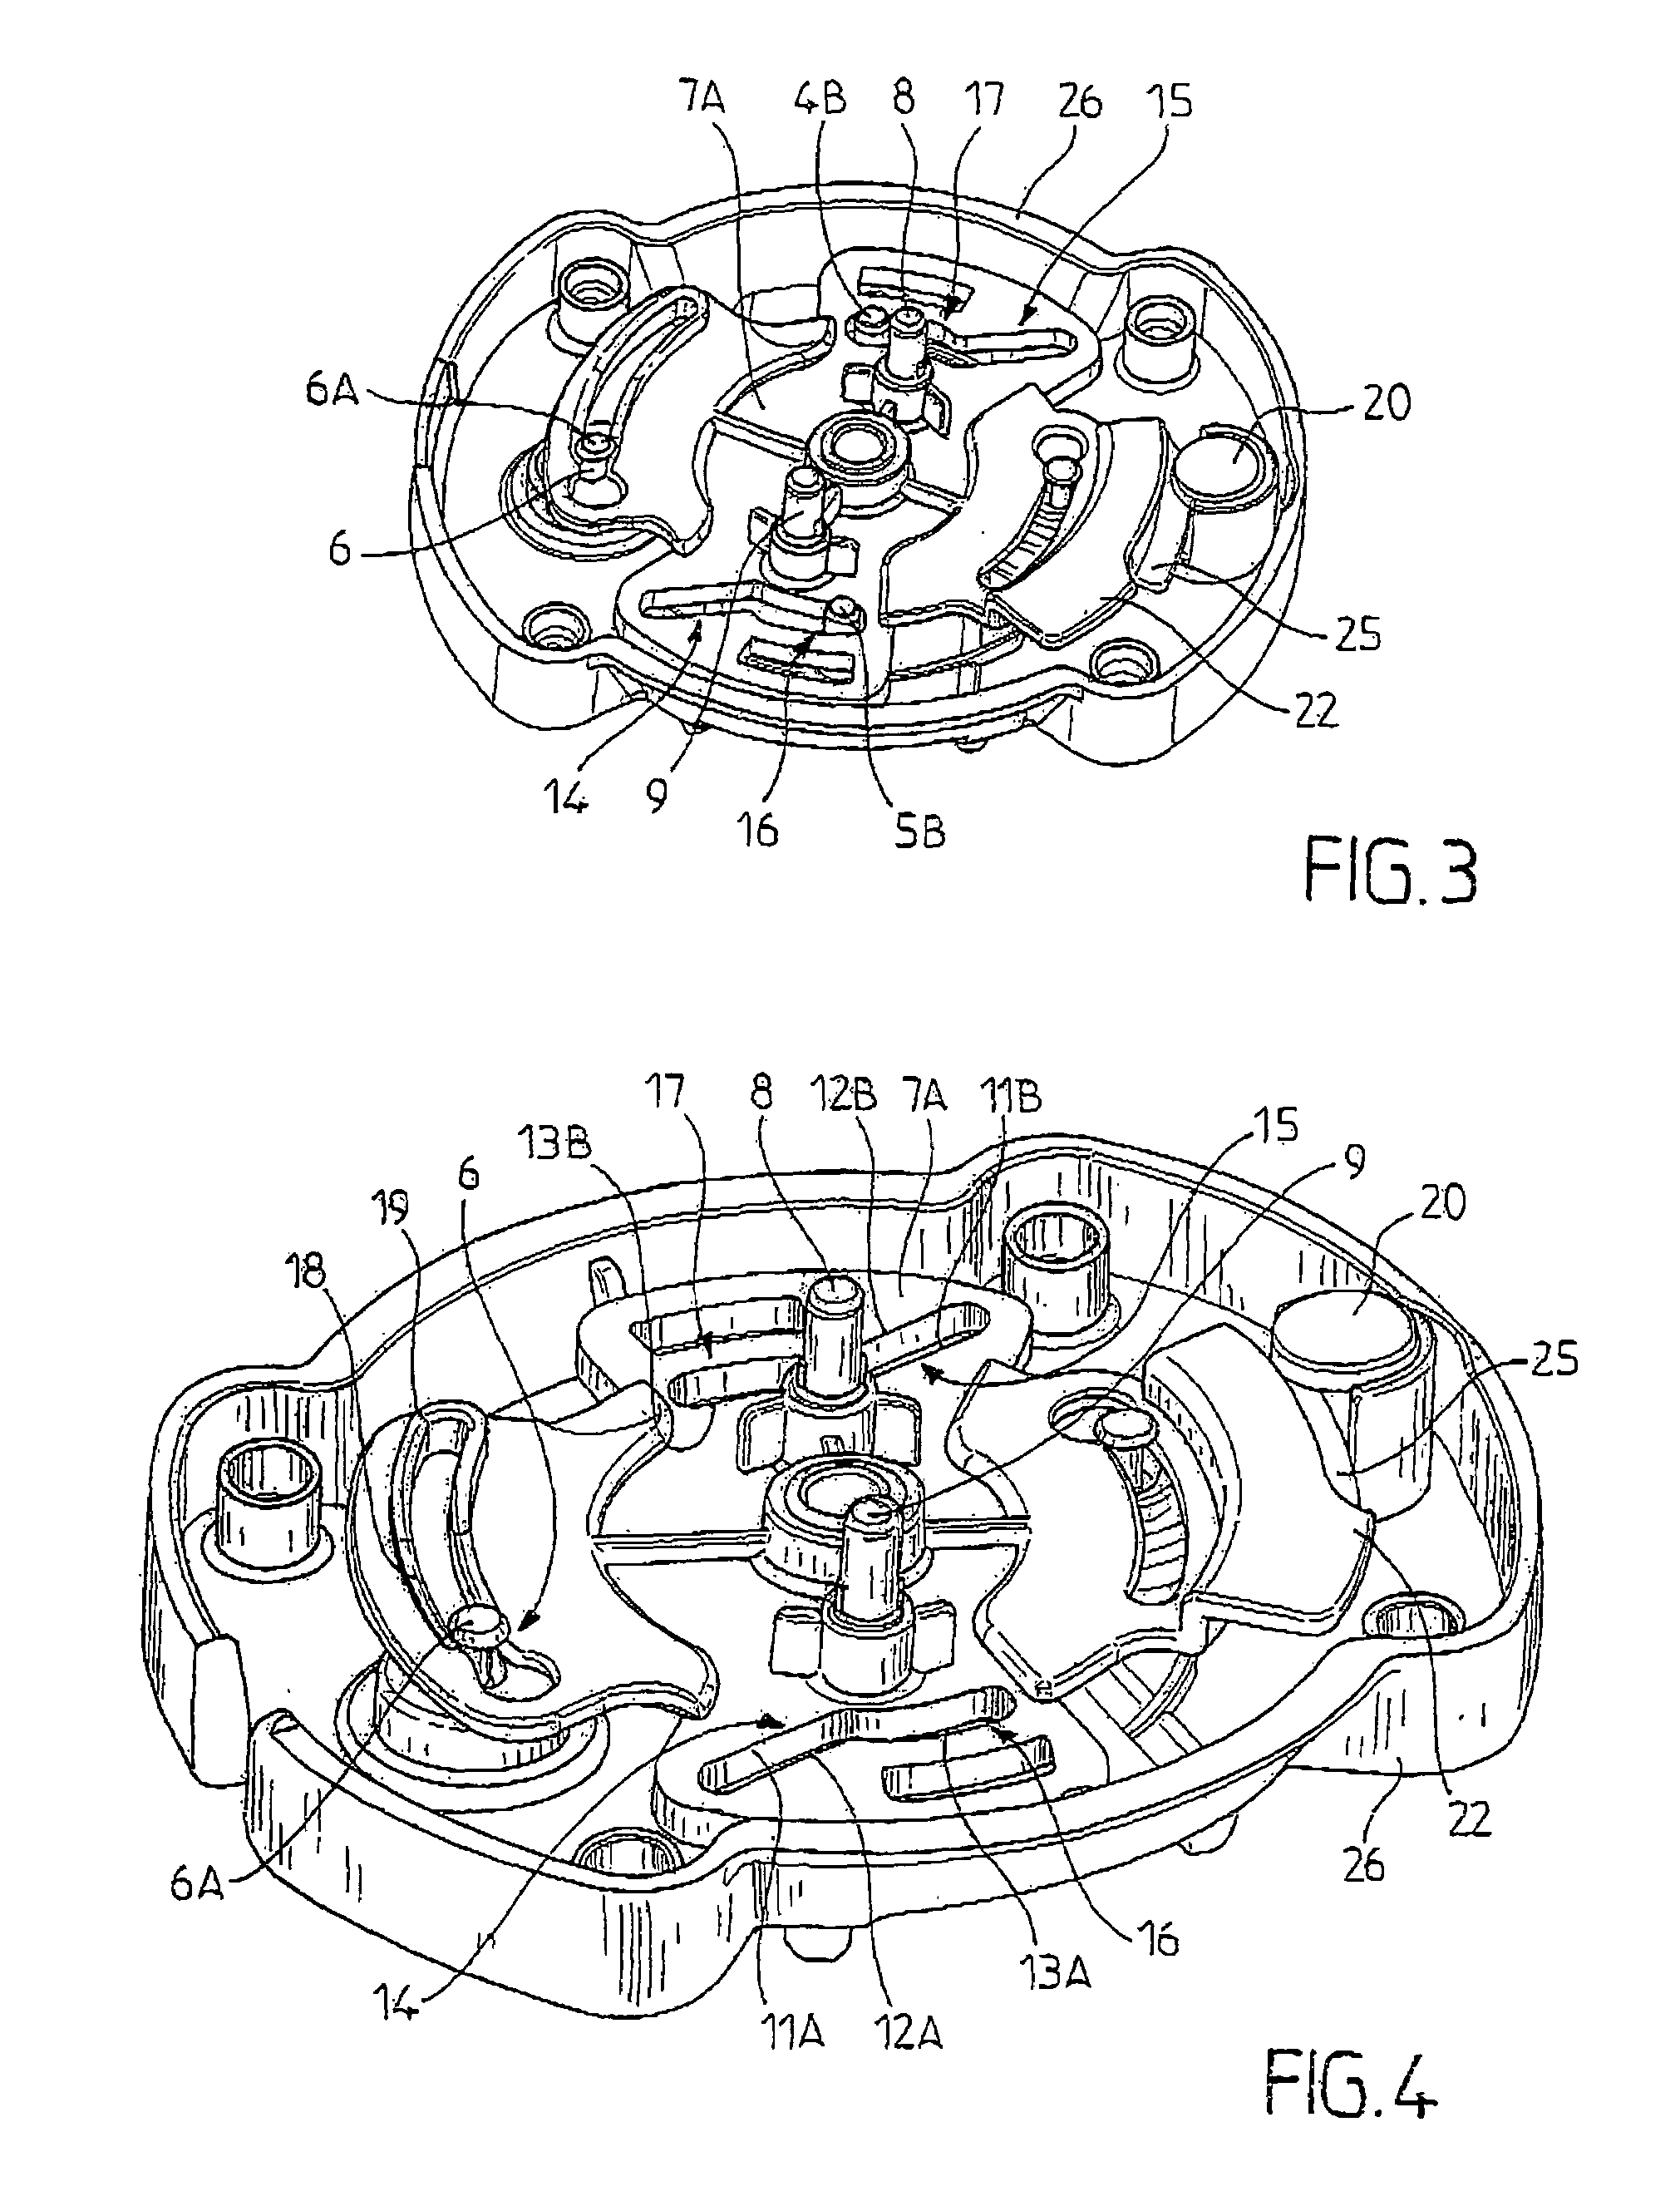 Pressure-cooking appliance having a single control member for decompression and for locking/unlocking